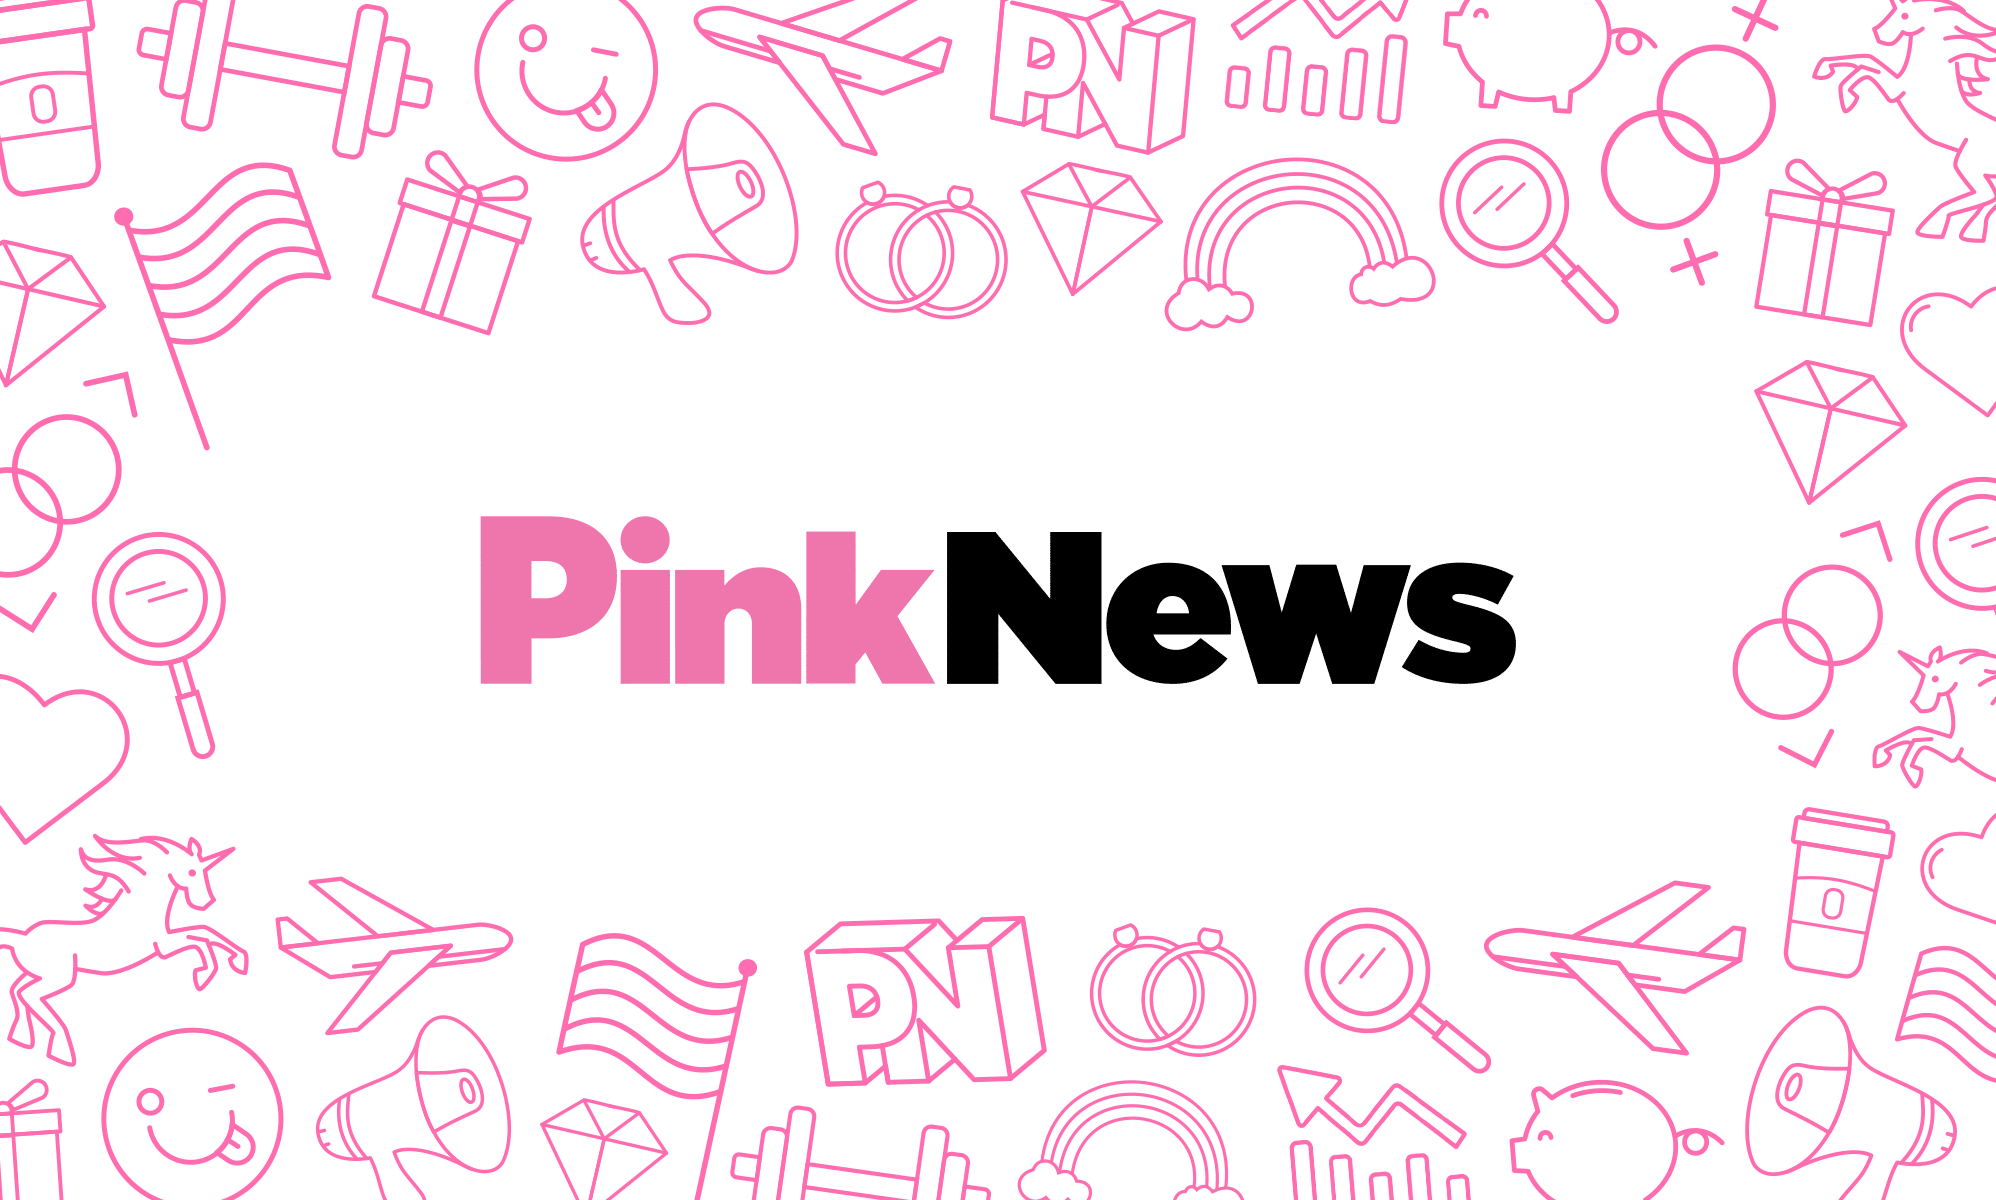 The PinkNews guide to the history of equal marriage in England and Wales